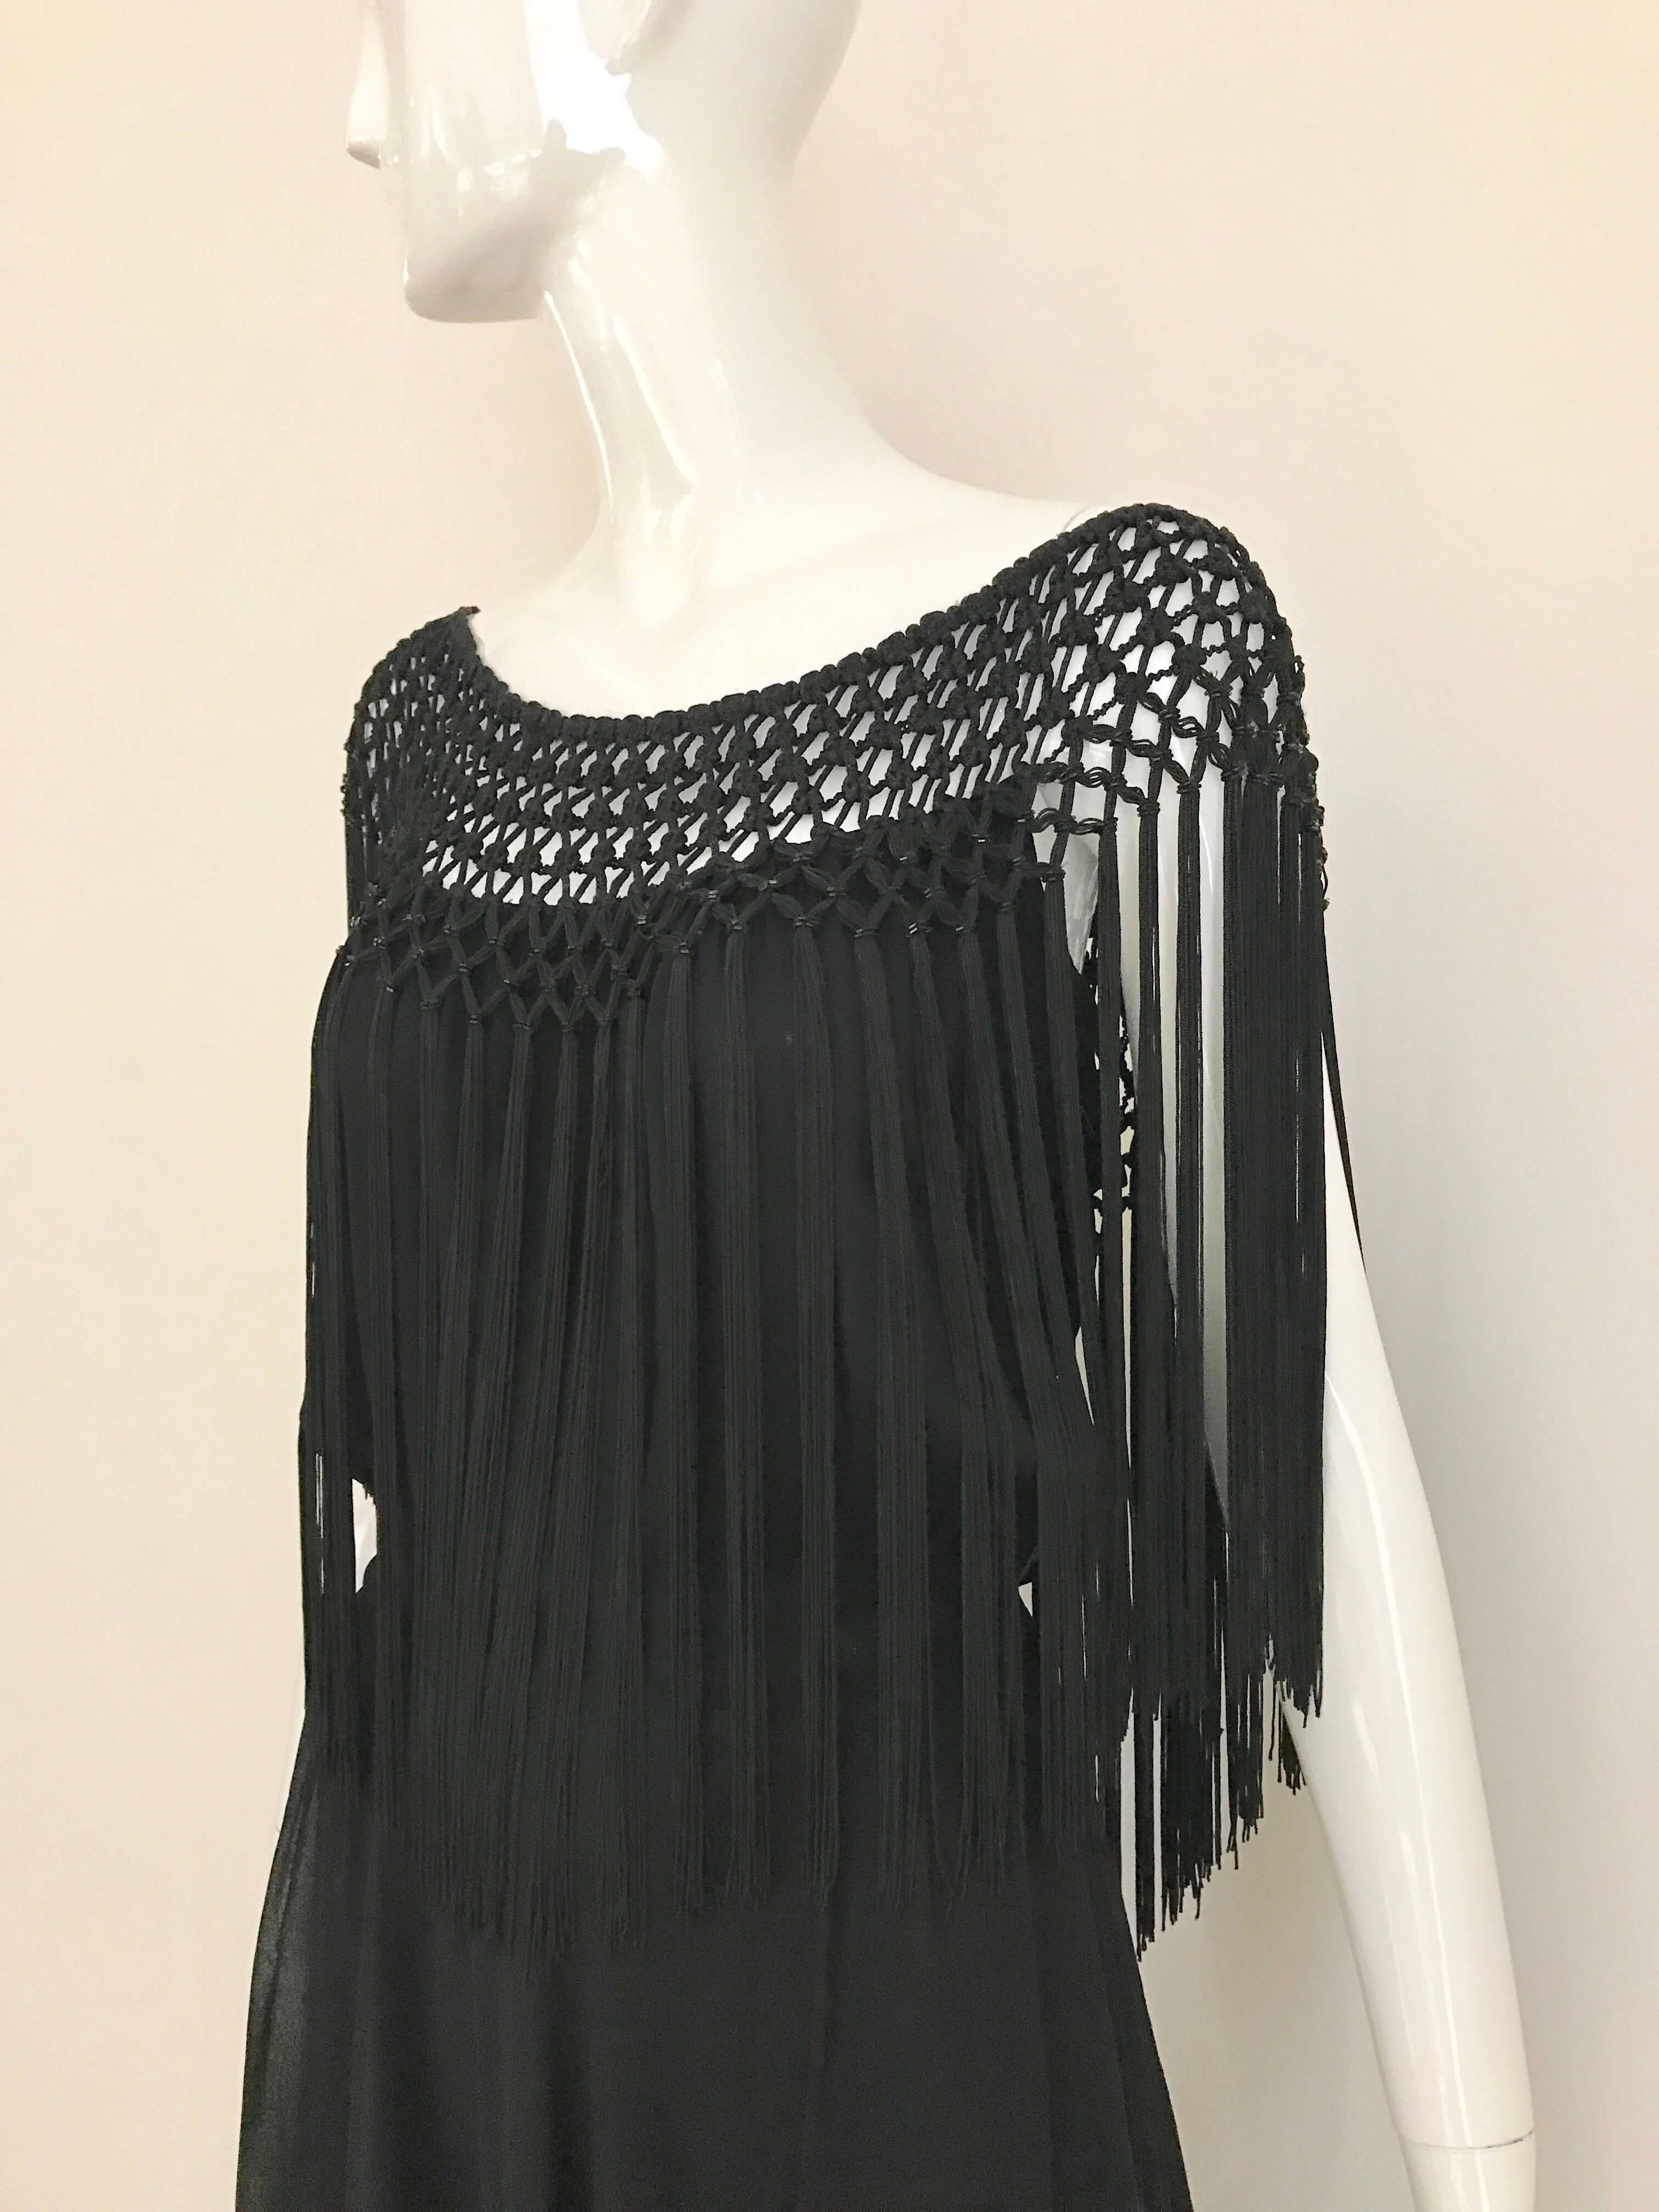 What a fun vintage Party cocktail dress! 1970s Black Silk dress with macrame silk  fringe.  Size 4
Bust: 36 inches
Waist: 26 inches